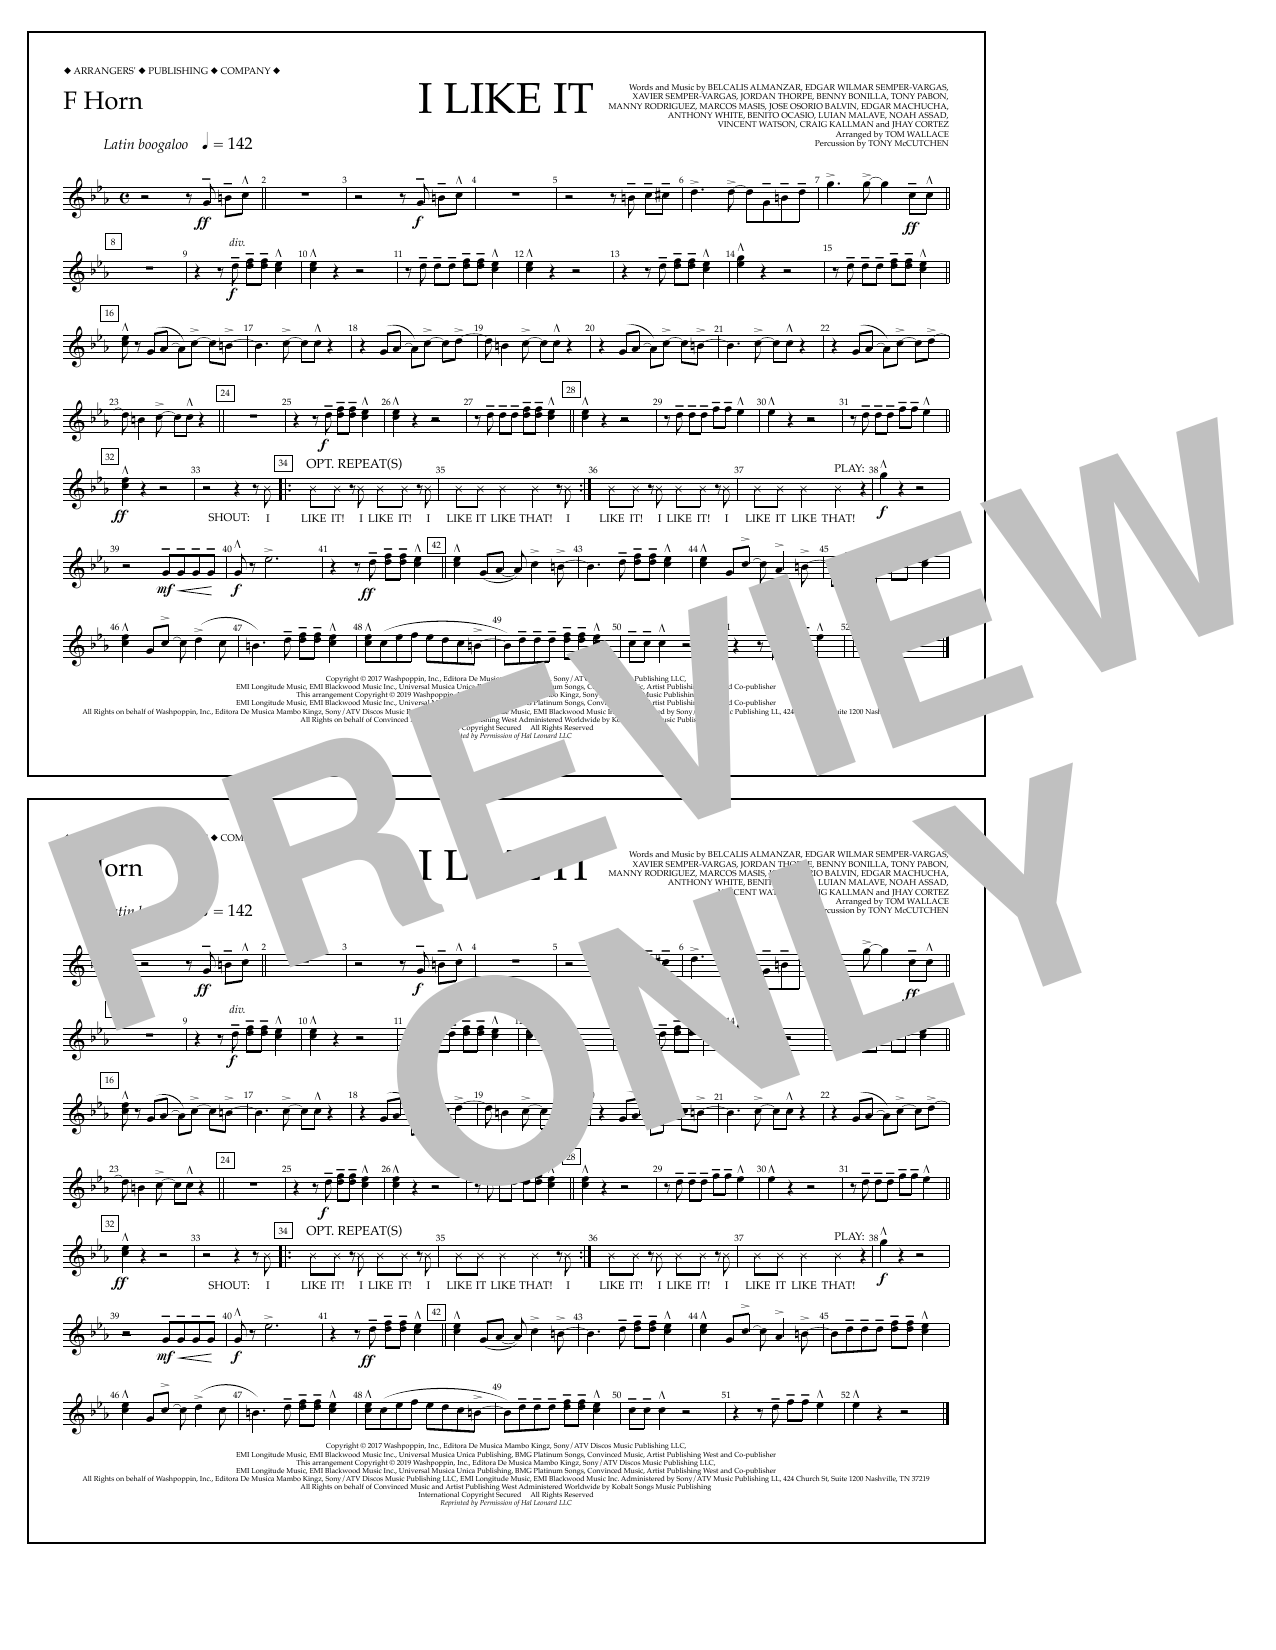 Cardi B, Bad Bunny & J Balvin I Like It (arr. Tom Wallace) - F Horn sheet music preview music notes and score for Marching Band including 1 page(s)